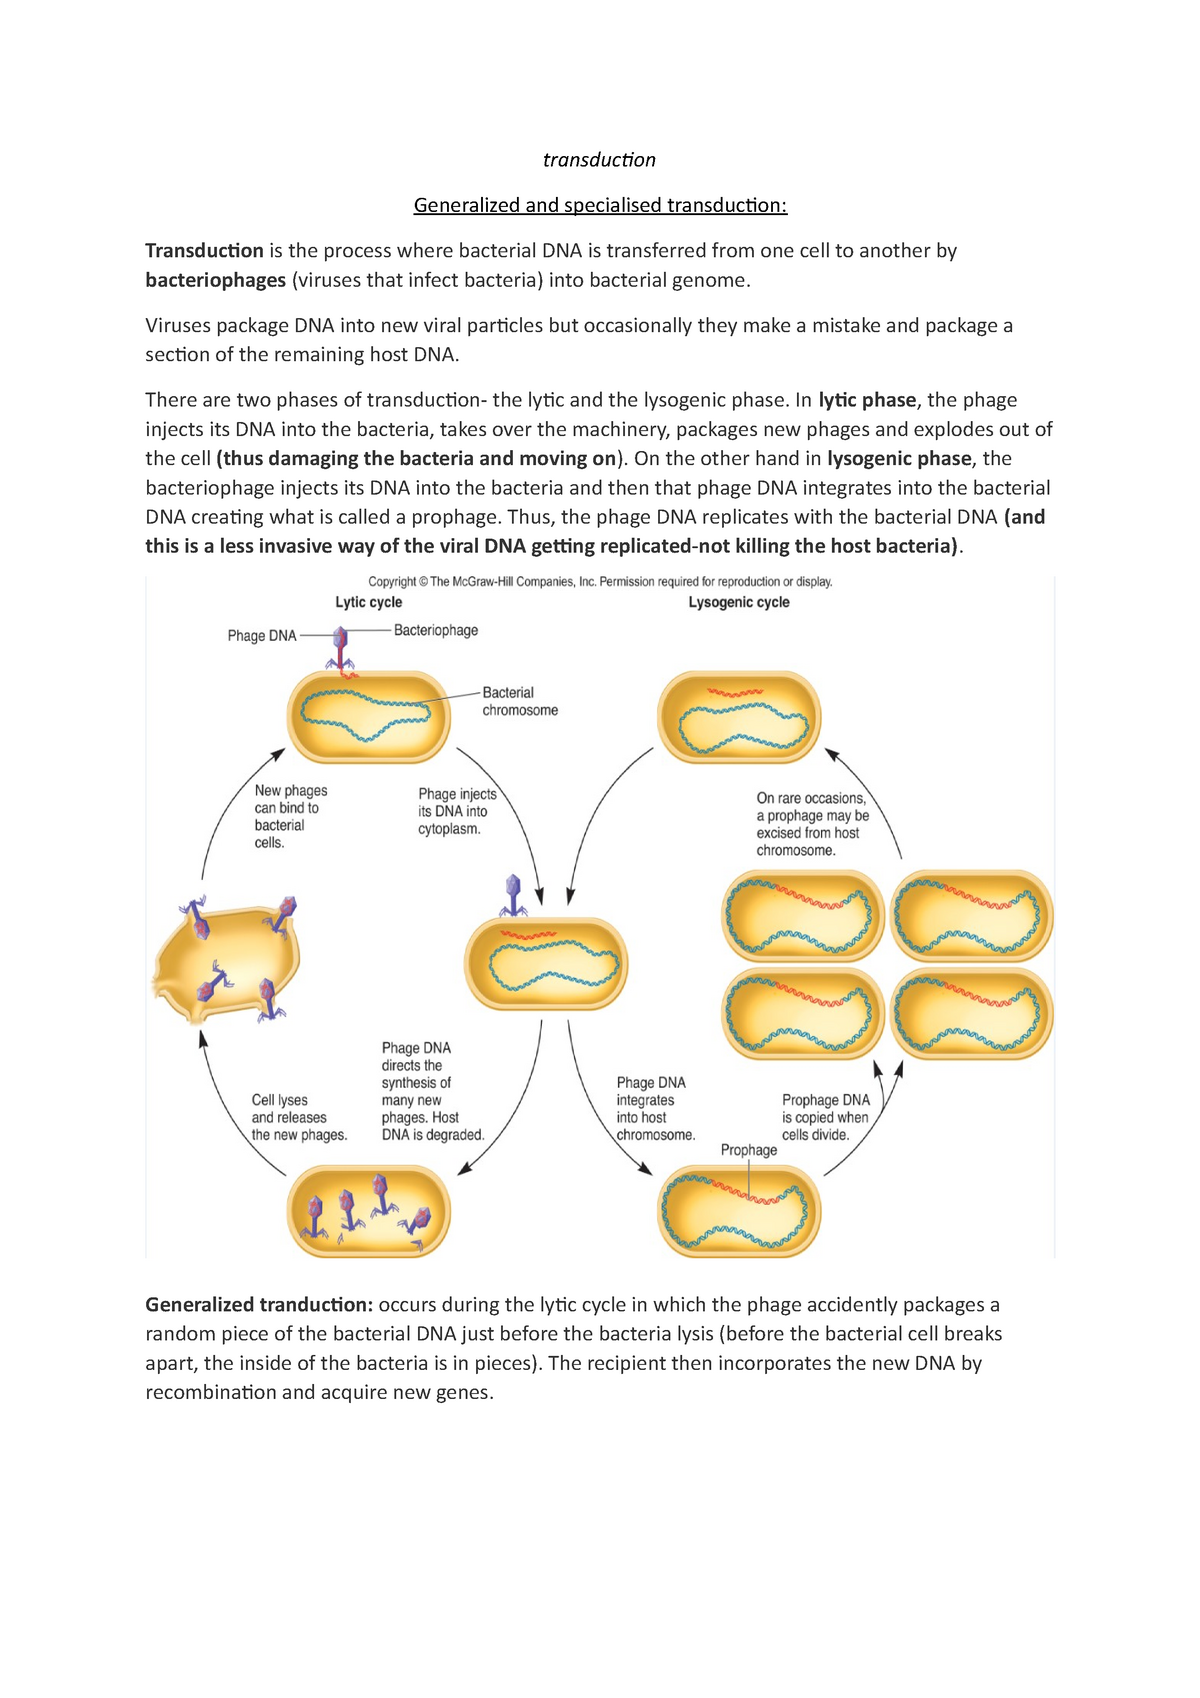 generalized transduction in bacteria